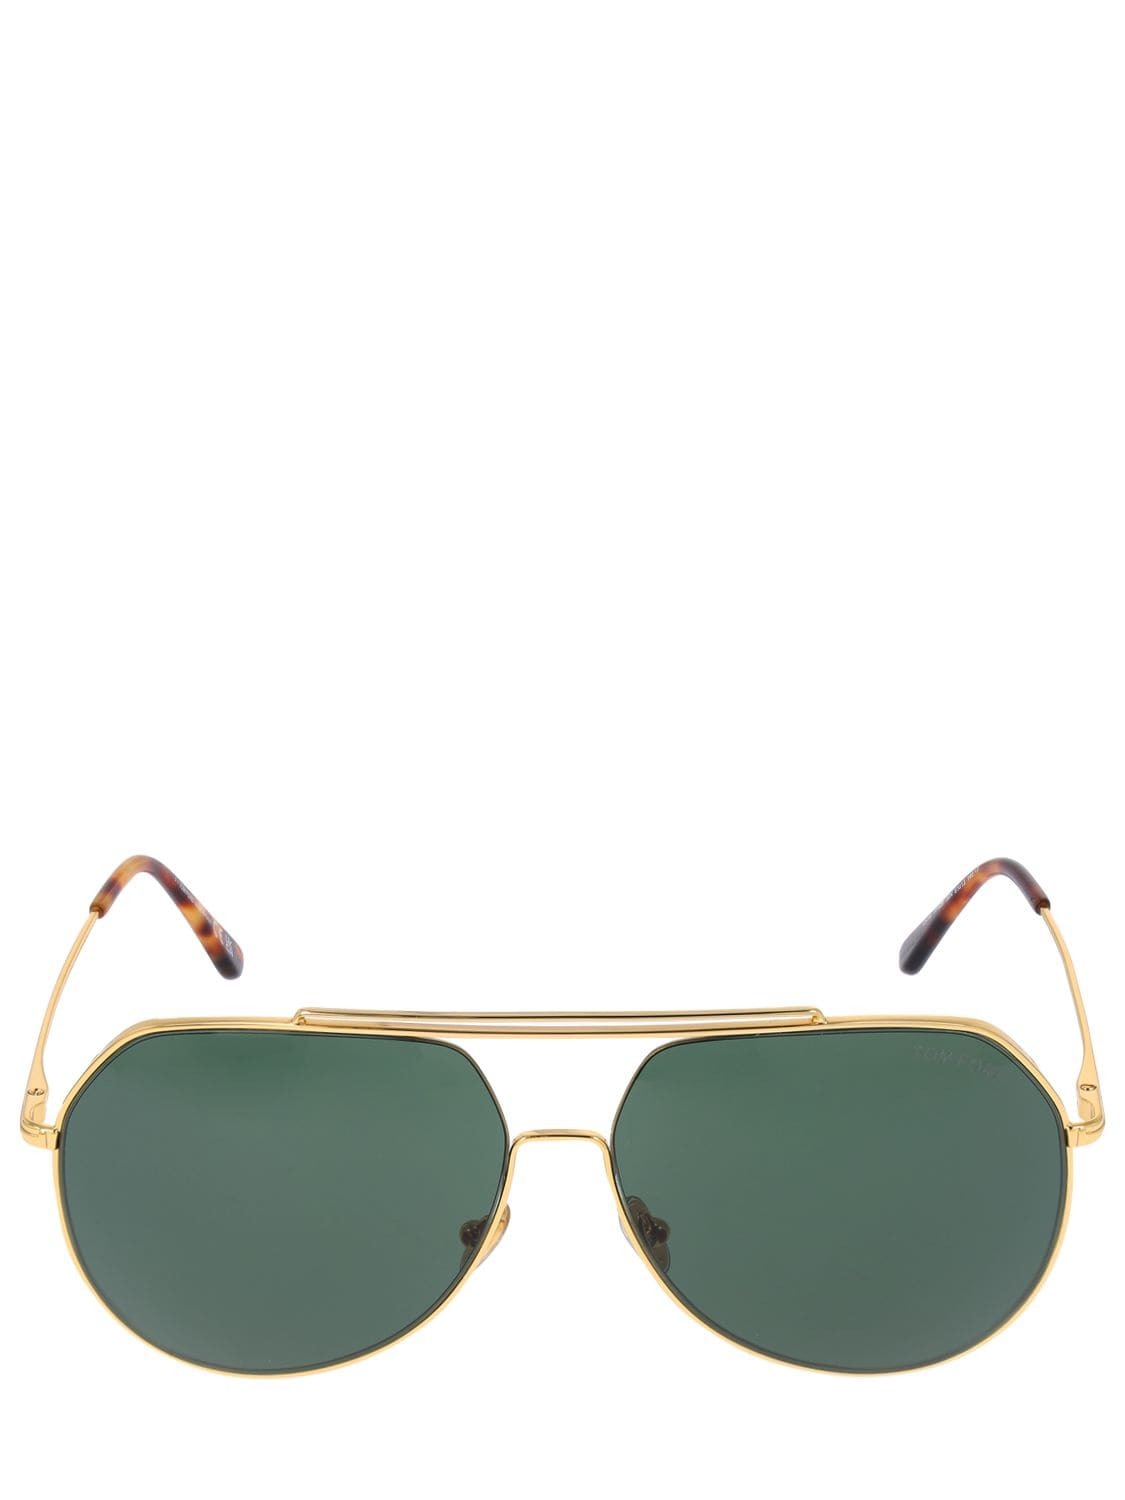 TOM FORD Clyde Metal Sunglasses in gold / green